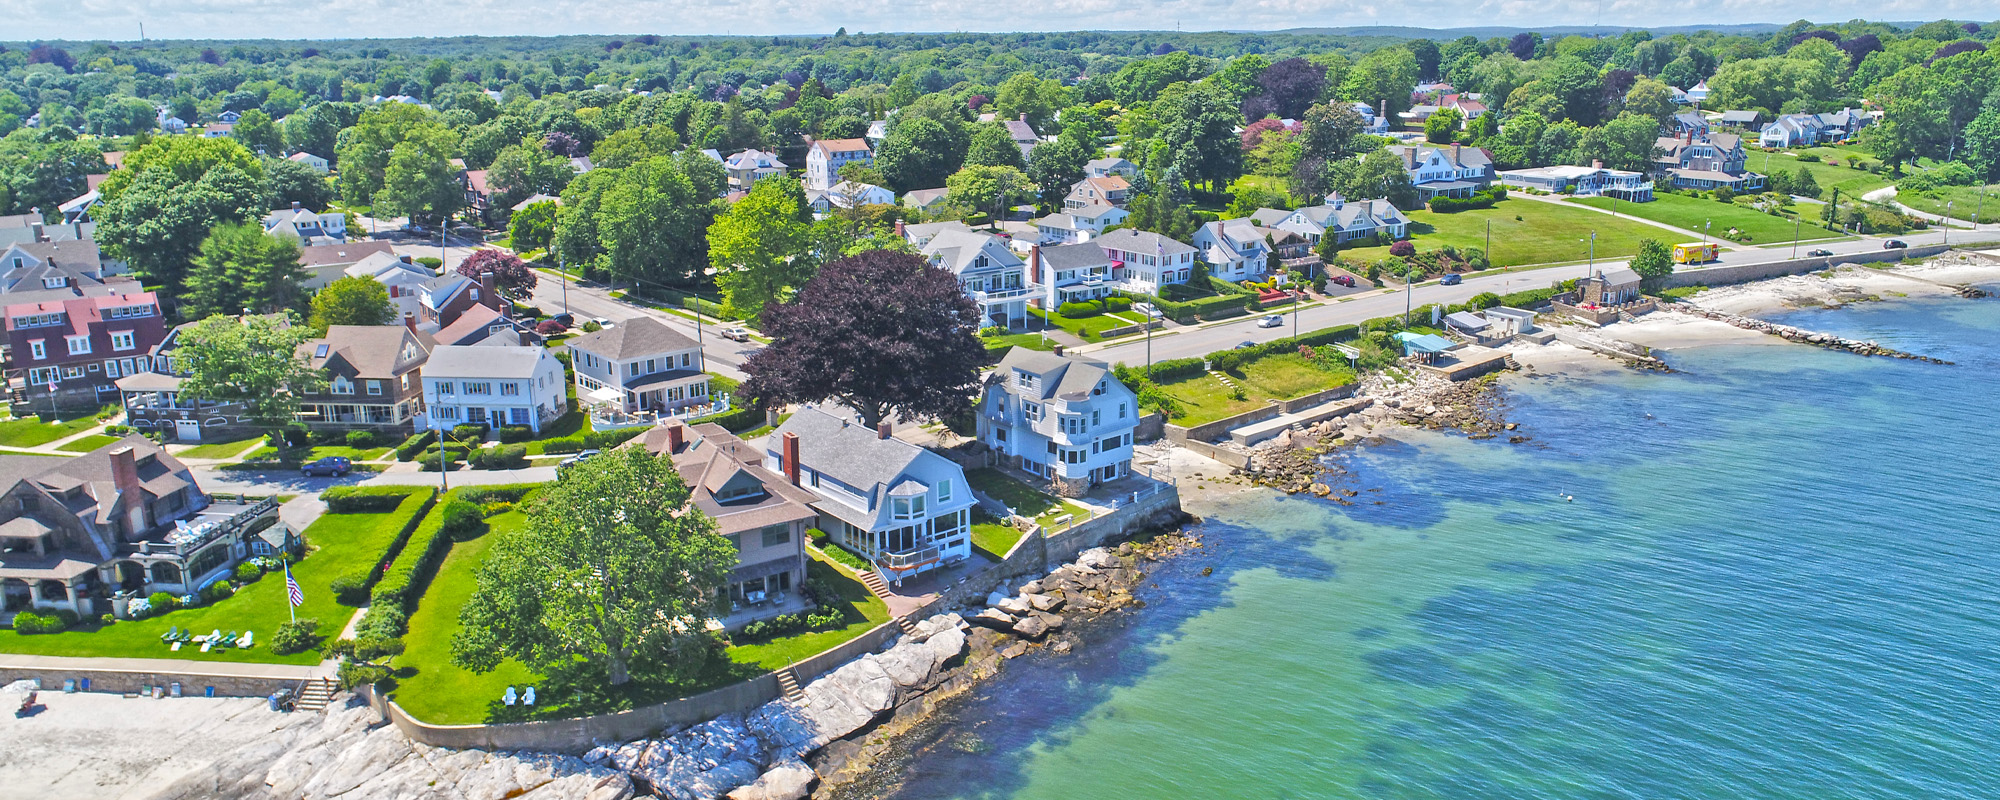 New London, CT Waterfront Homes